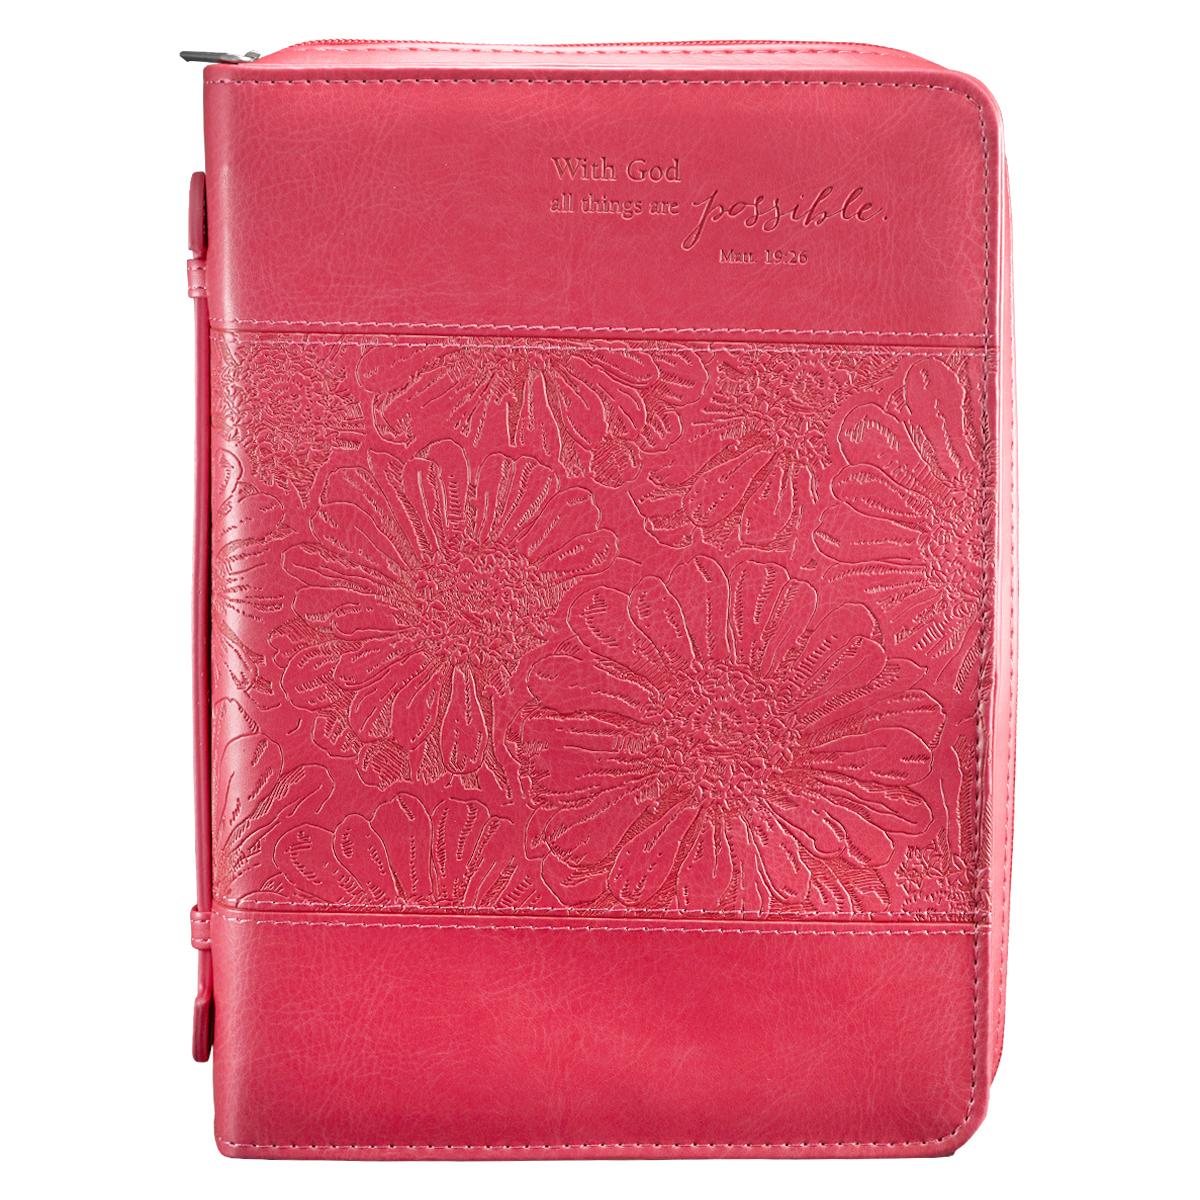 Image of "All Things Are Possible" (Pink) LuxLeather Medium Bible Cover other